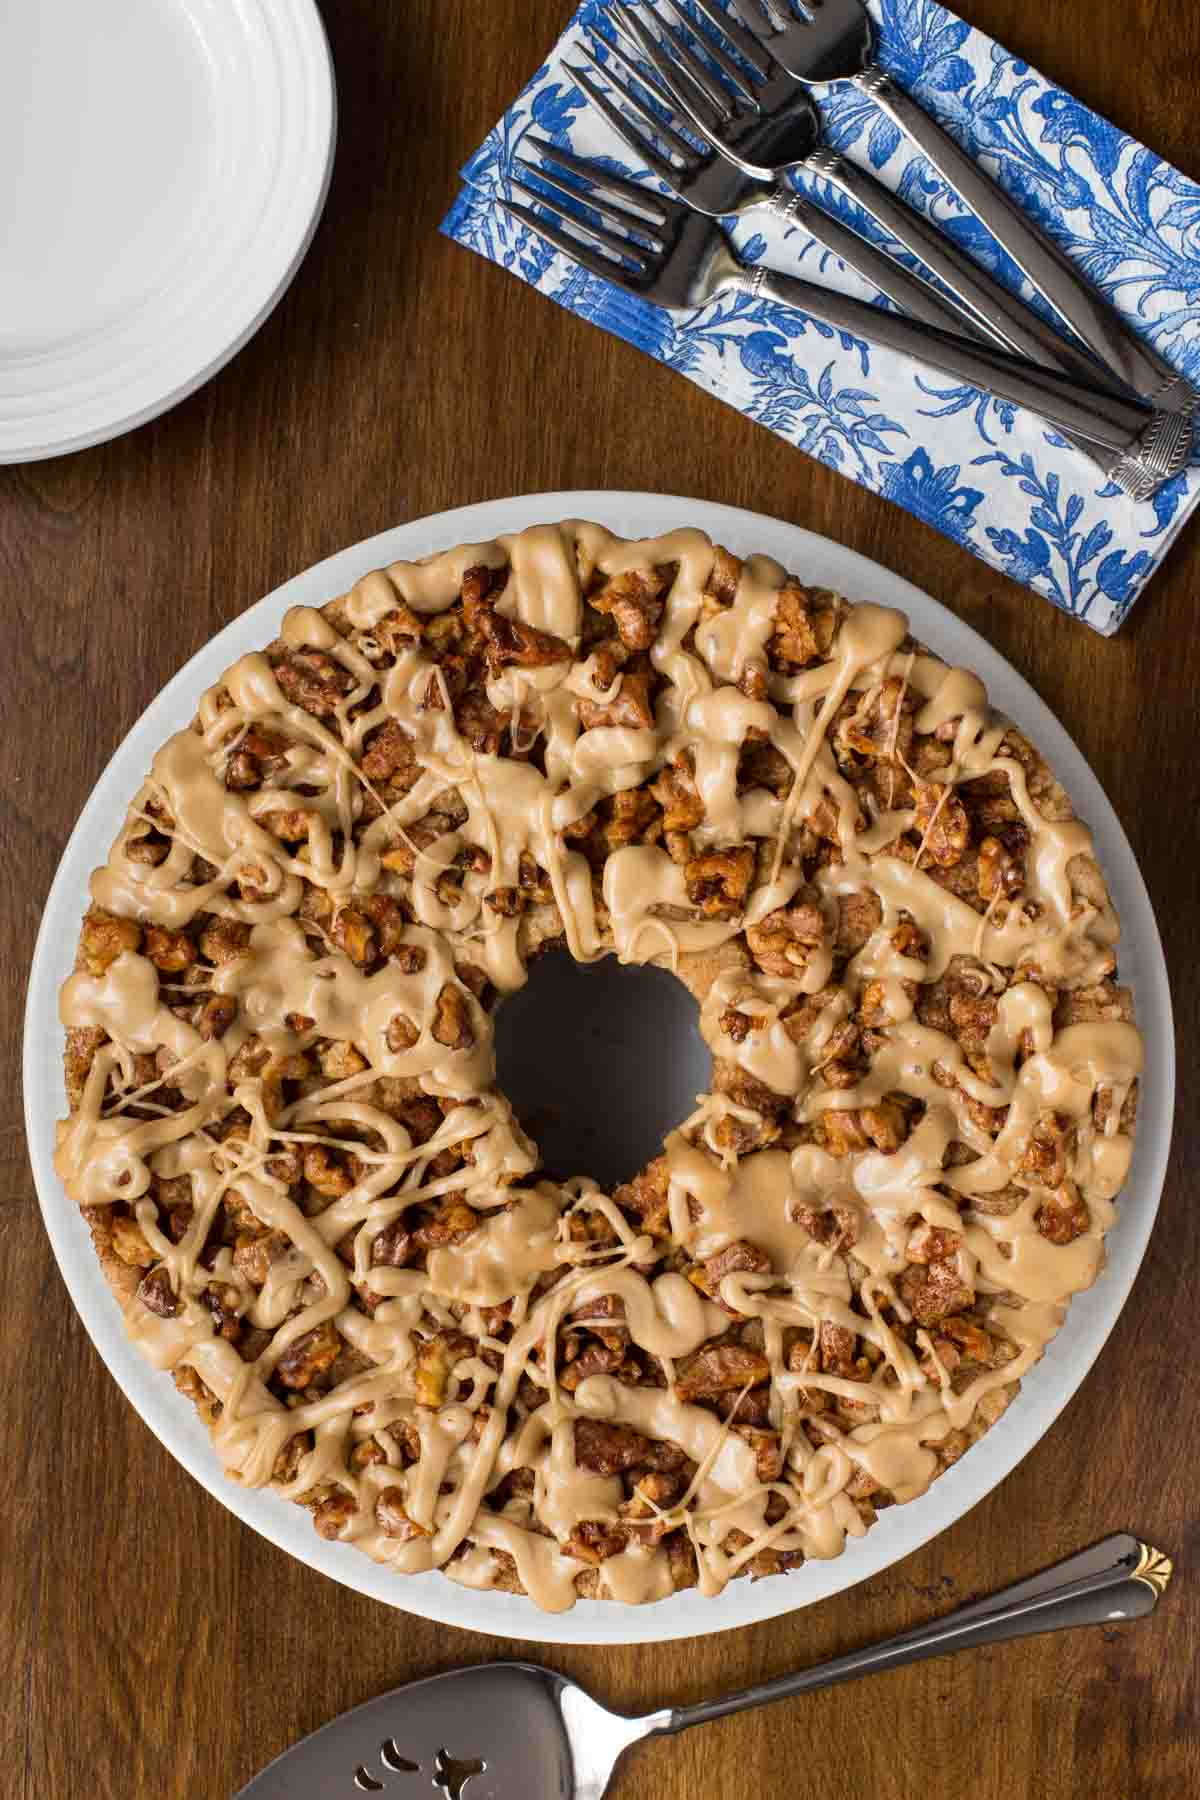 Overhead vertical photo of a Maple Walnut Banana Coffee Cake on a white serving plate with blue and white napkins.